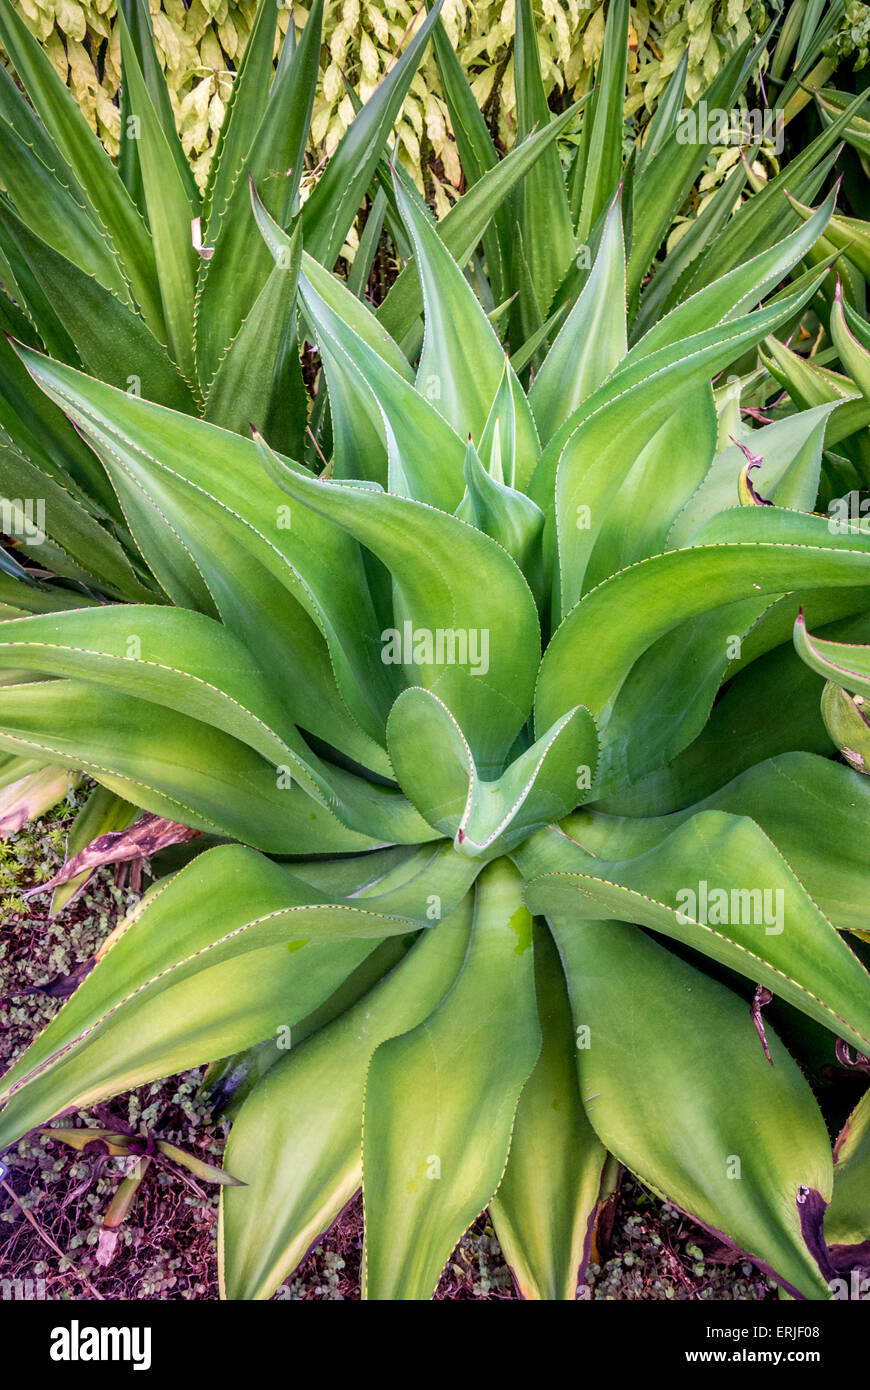 Changi Airport, Singapore. Rooftop Cactus garden. Tequila Cactus (Agave tequilana) plant Stock Photo